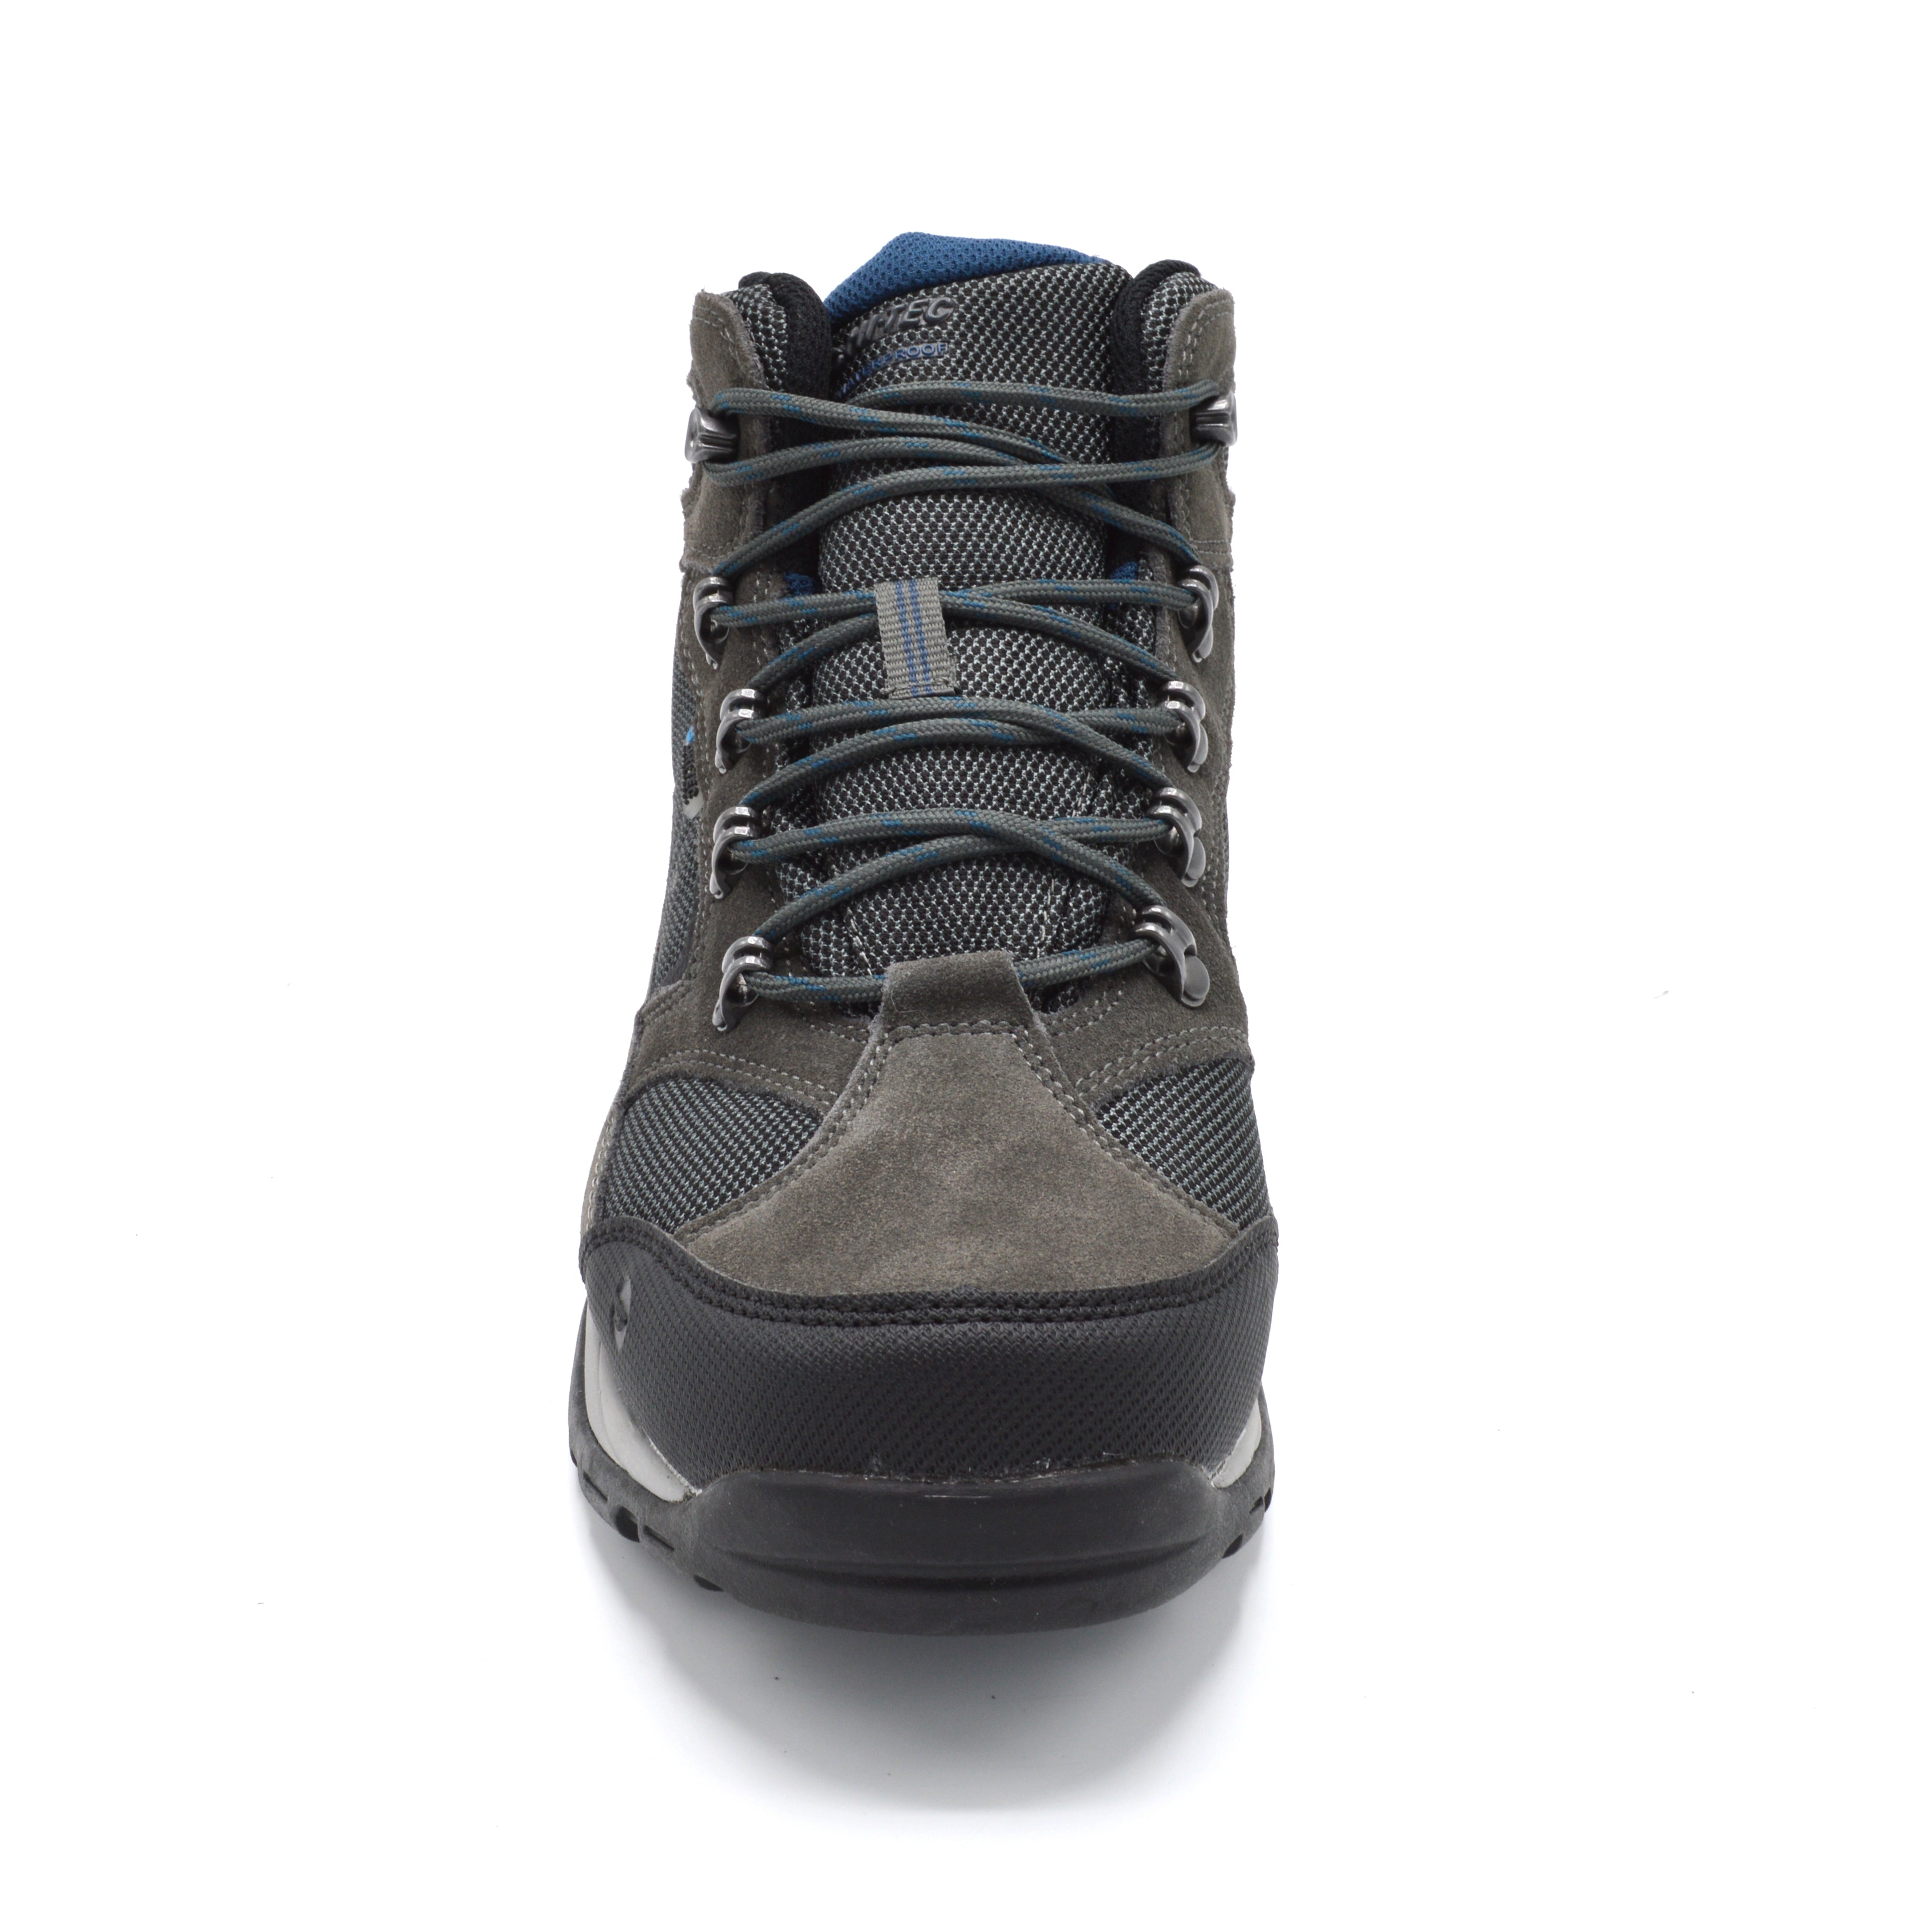 Hiker - Wide Fitting Walking and Trail Boot - 2V (2E-4E) Fitting - Grey